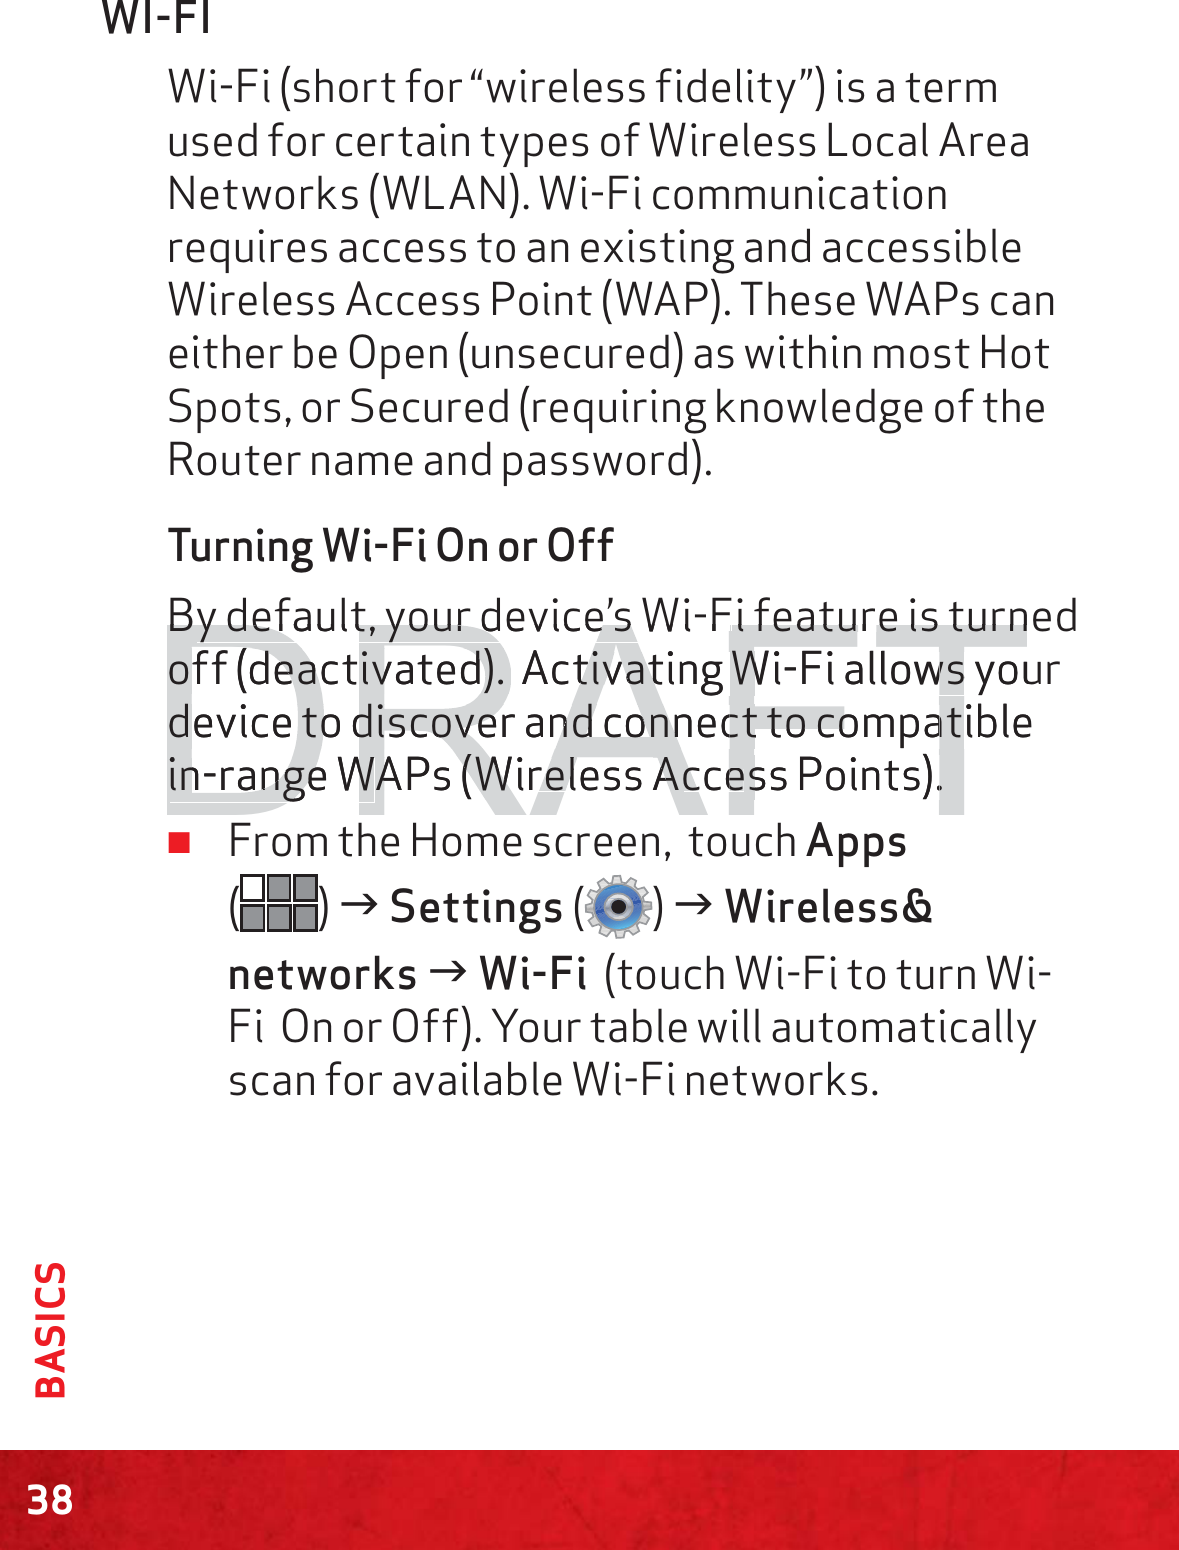 38BASICSWI-FIWi-Fi (short for “wireless fidelity”) is a term used for certain types of Wireless Local Area Networks (WLAN). Wi-Fi communication requires access to an existing and accessible Wireless Access Point (WAP). These WAPs can either be Open (unsecured) as within most Hot Spots, or Secured (requiring knowledge of the Router name and password).Turning Wi-Fi On or Off By default, your device’s Wi-Fi feature is turned off (deactivated).  Activating Wi-Fi allows your device to discover and connect to compatible in-range WAPs (Wireless Access Points). ≠From the Home screen,  touch Apps  () J Settings () J Wireless&amp; networks J Wi-Fi  (touch Wi-Fi to turn Wi-Fi  On or Off). Your table will automatically scan for available Wi-Fi networks. DRAFTBBy default, your device s Wiy default, your device s FFi feai feature is turnture is turnoff (deactivated).  off (deactivated). Activatitivatng Wi-WFi allows youwsdevice to discover and connect to compatibledevice to discover and connect to compatin-range Win-range WAAPs (W(Wirelessreless AAcceccess Points).ss Points).